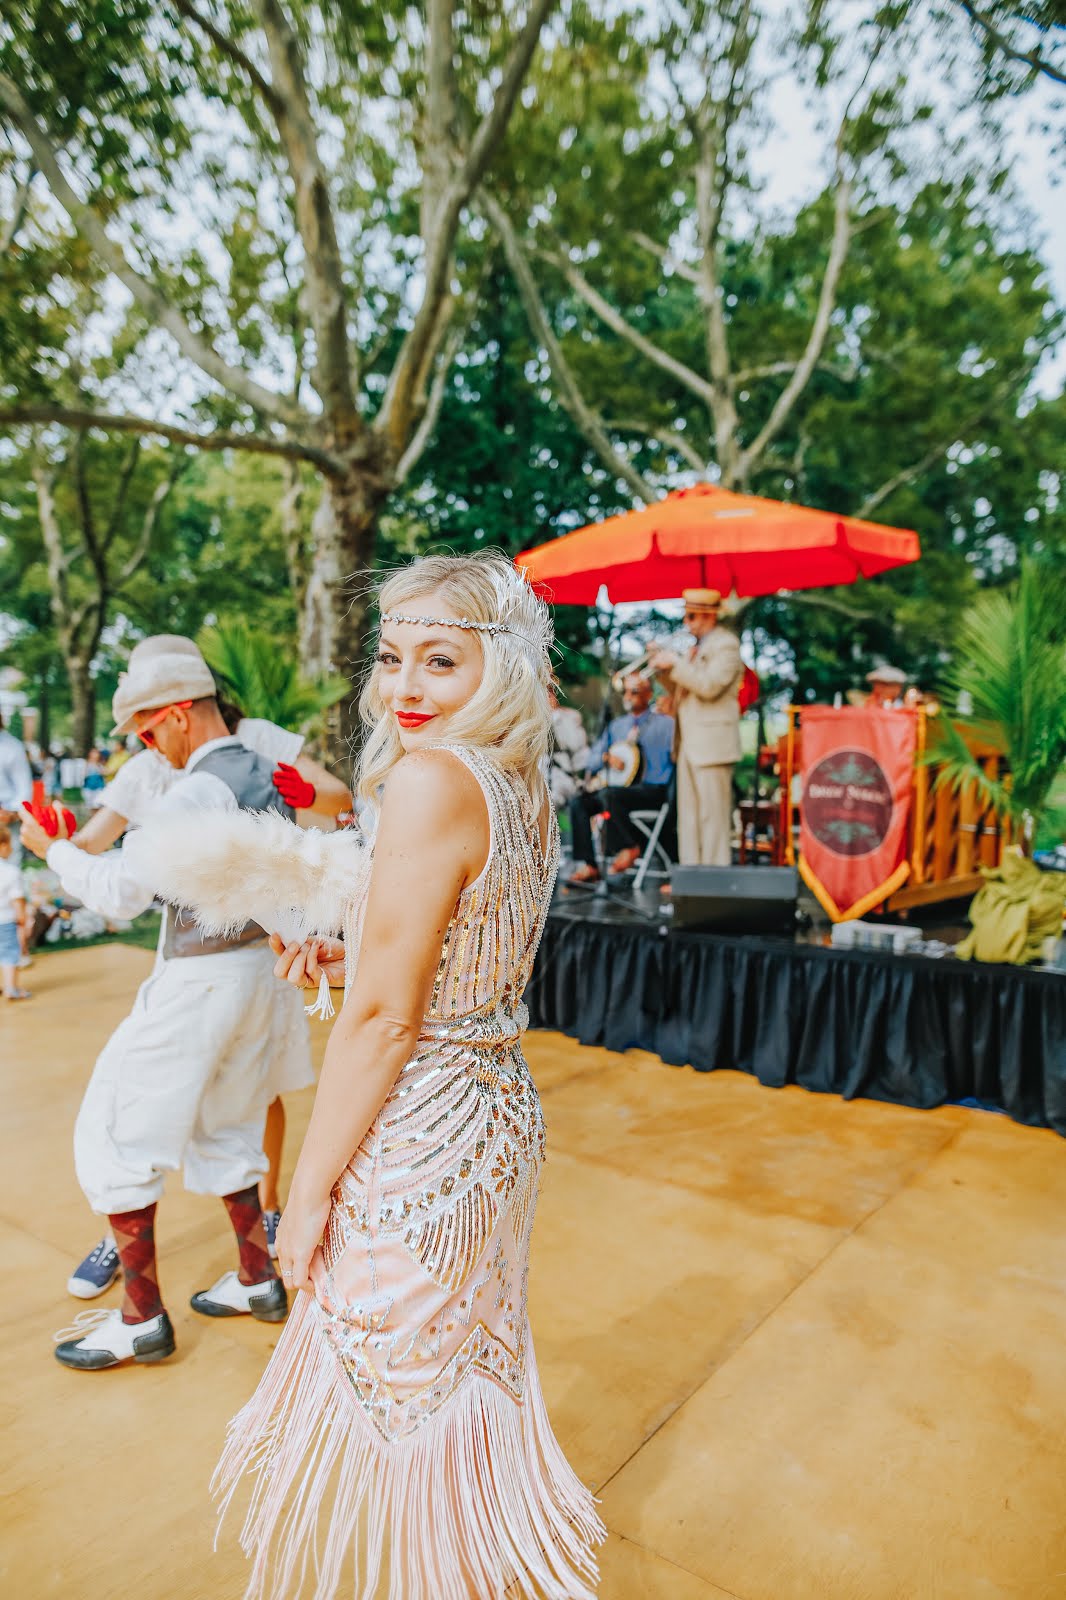 Jazz Age Lawn Party 2018 - Rach Martino